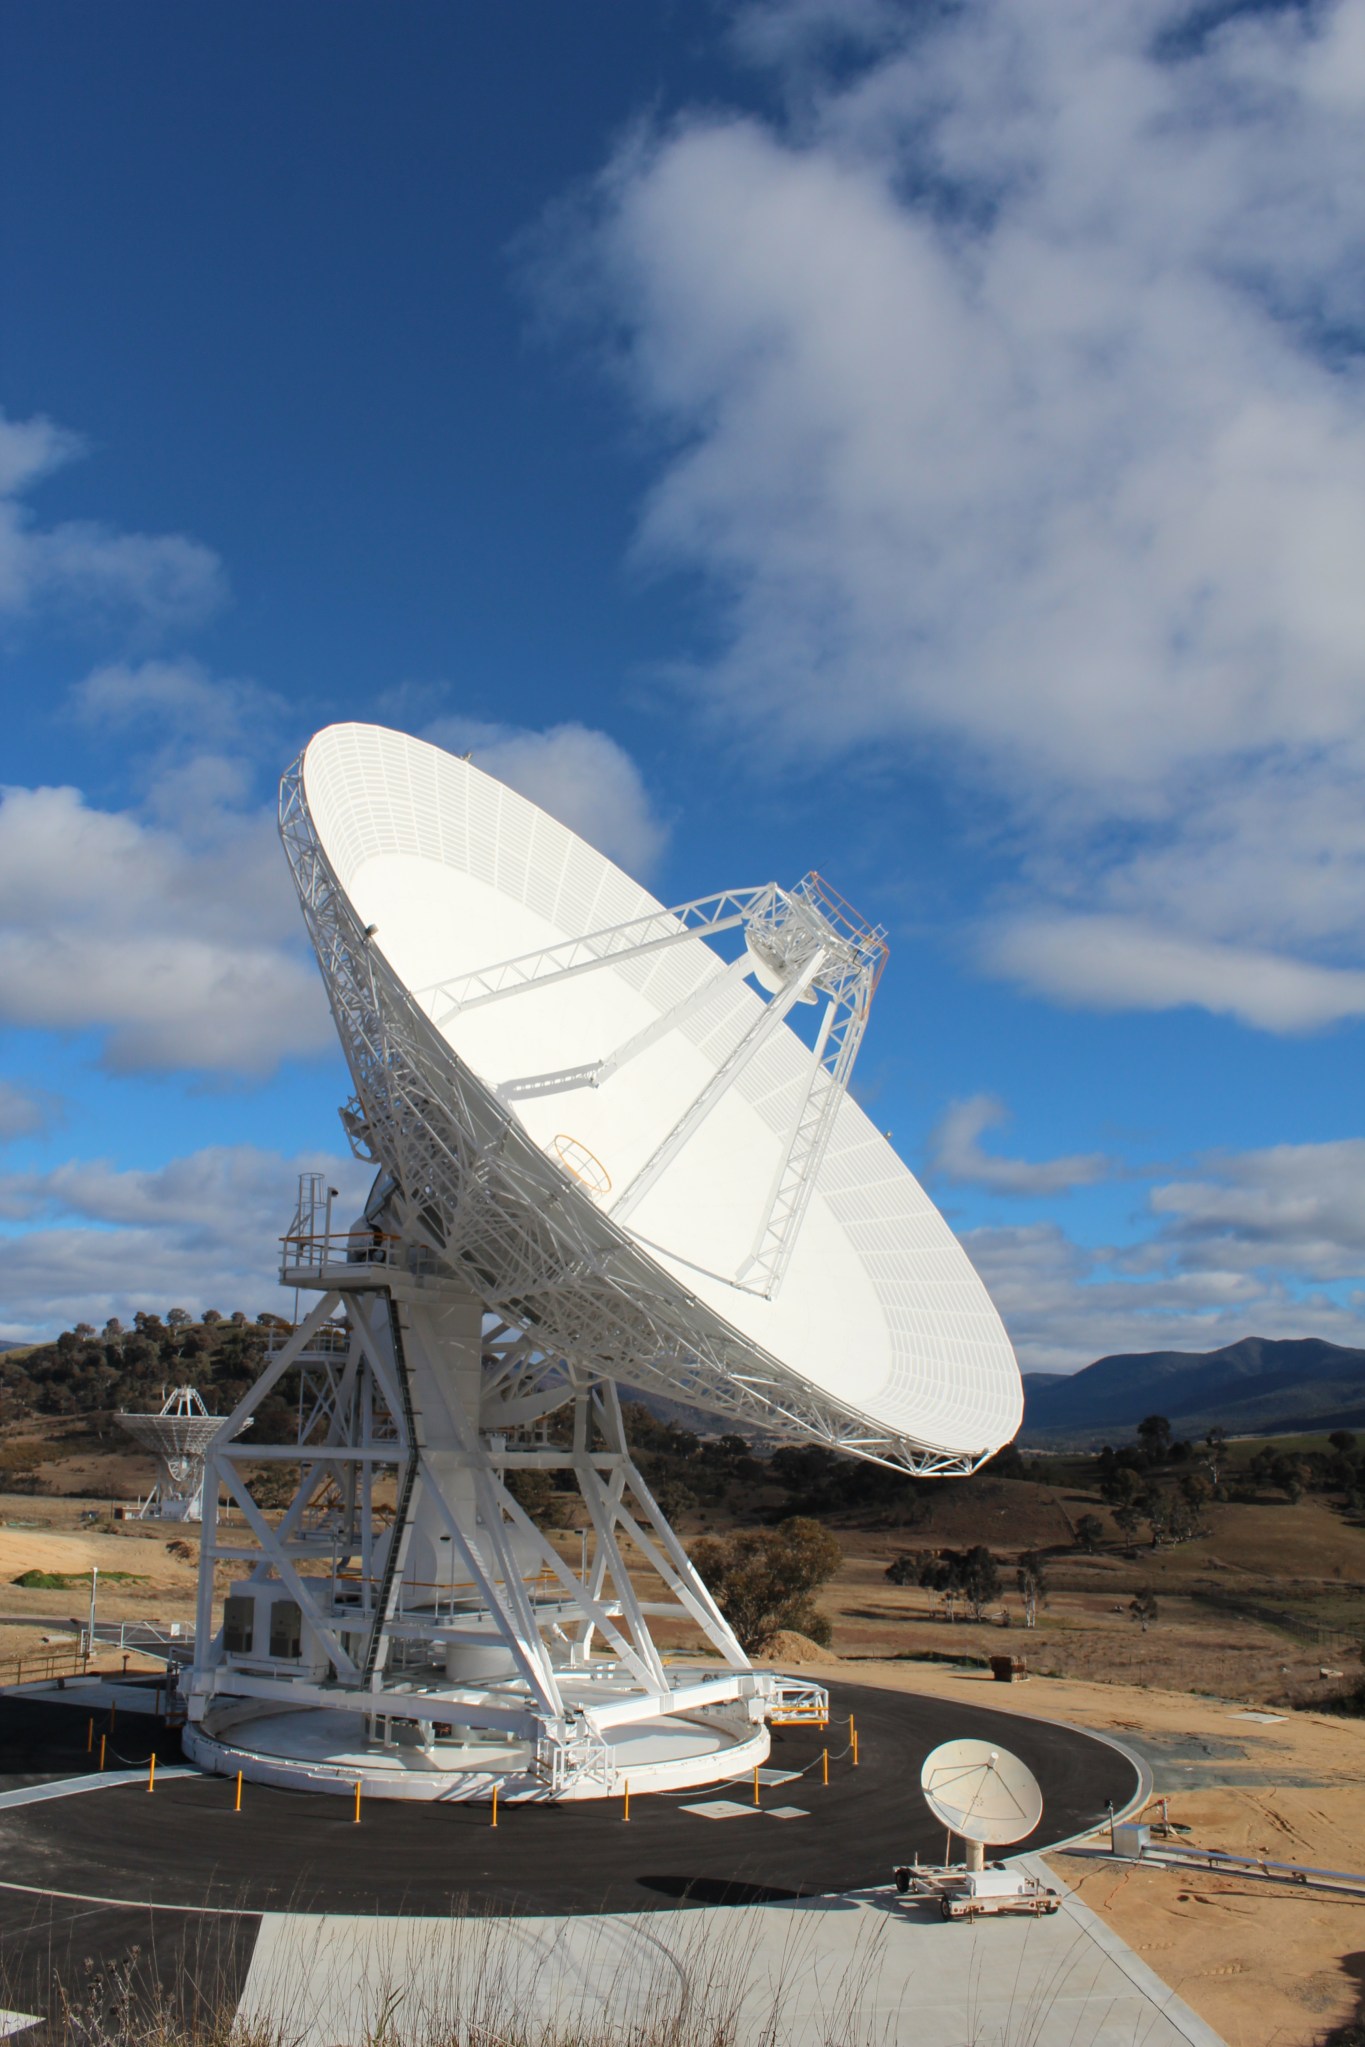 Deep Space Station – 36 (DSS-36) in Canberra, Australia became operational on October 1.